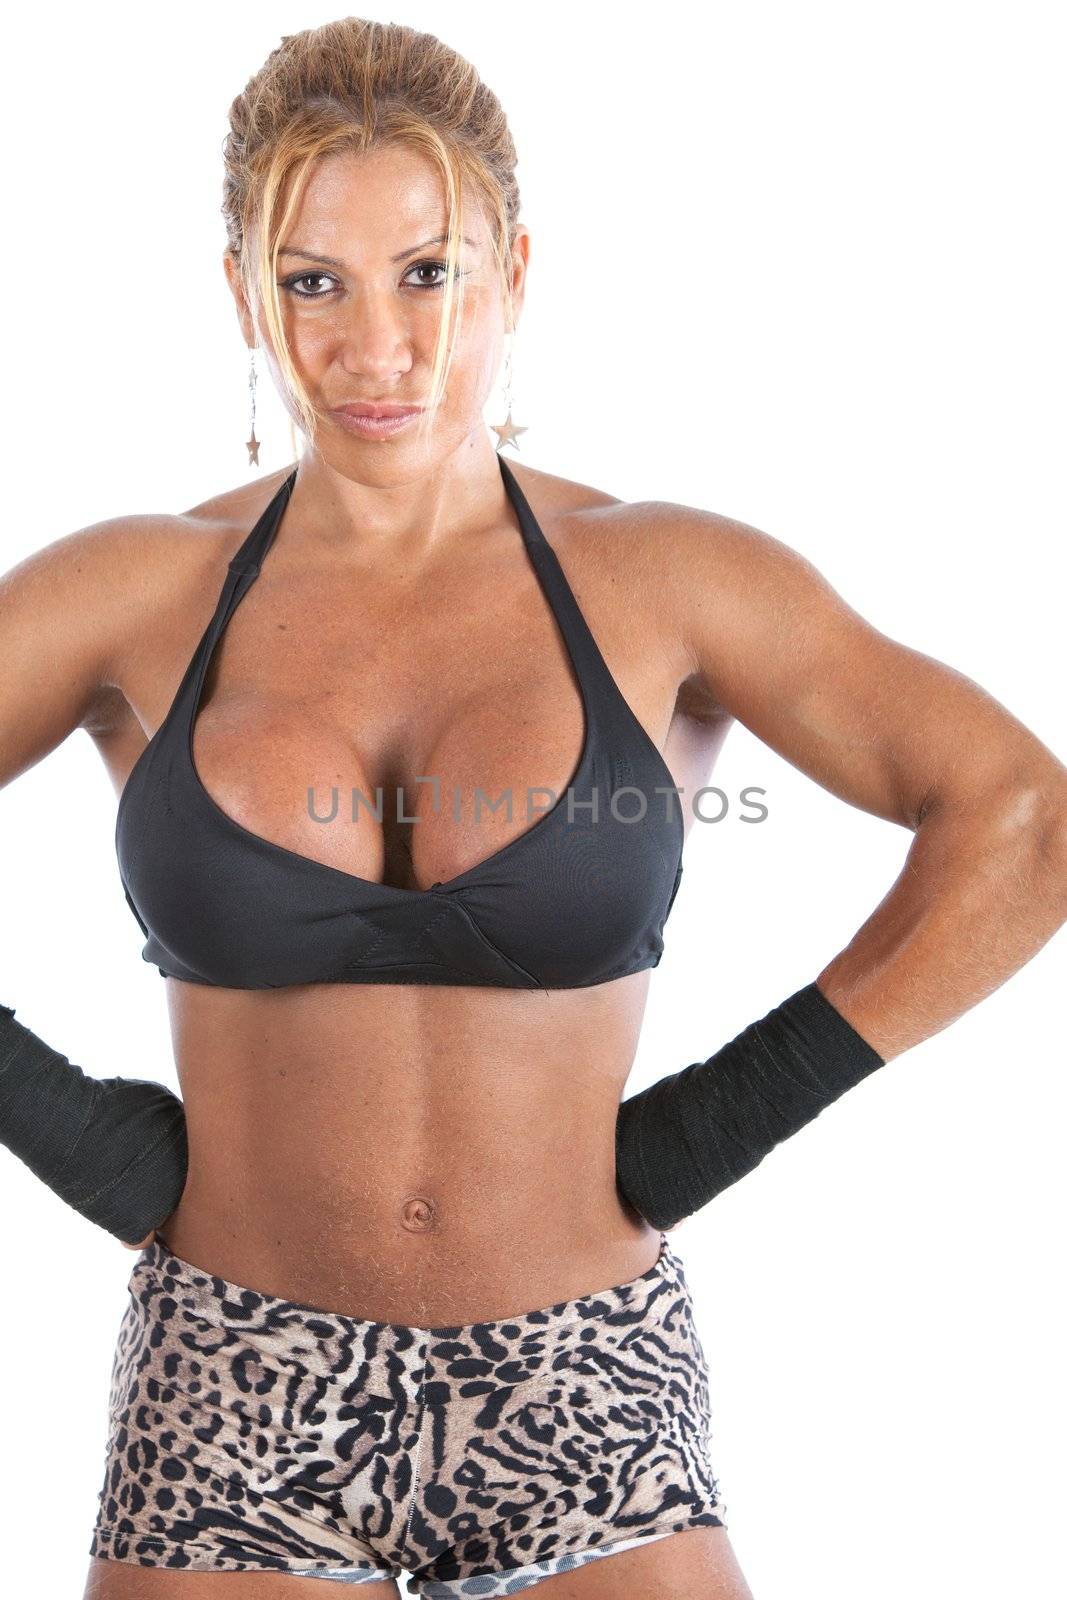 A blonde female bodybuilder isolated on a white background.   Image is part of a series.